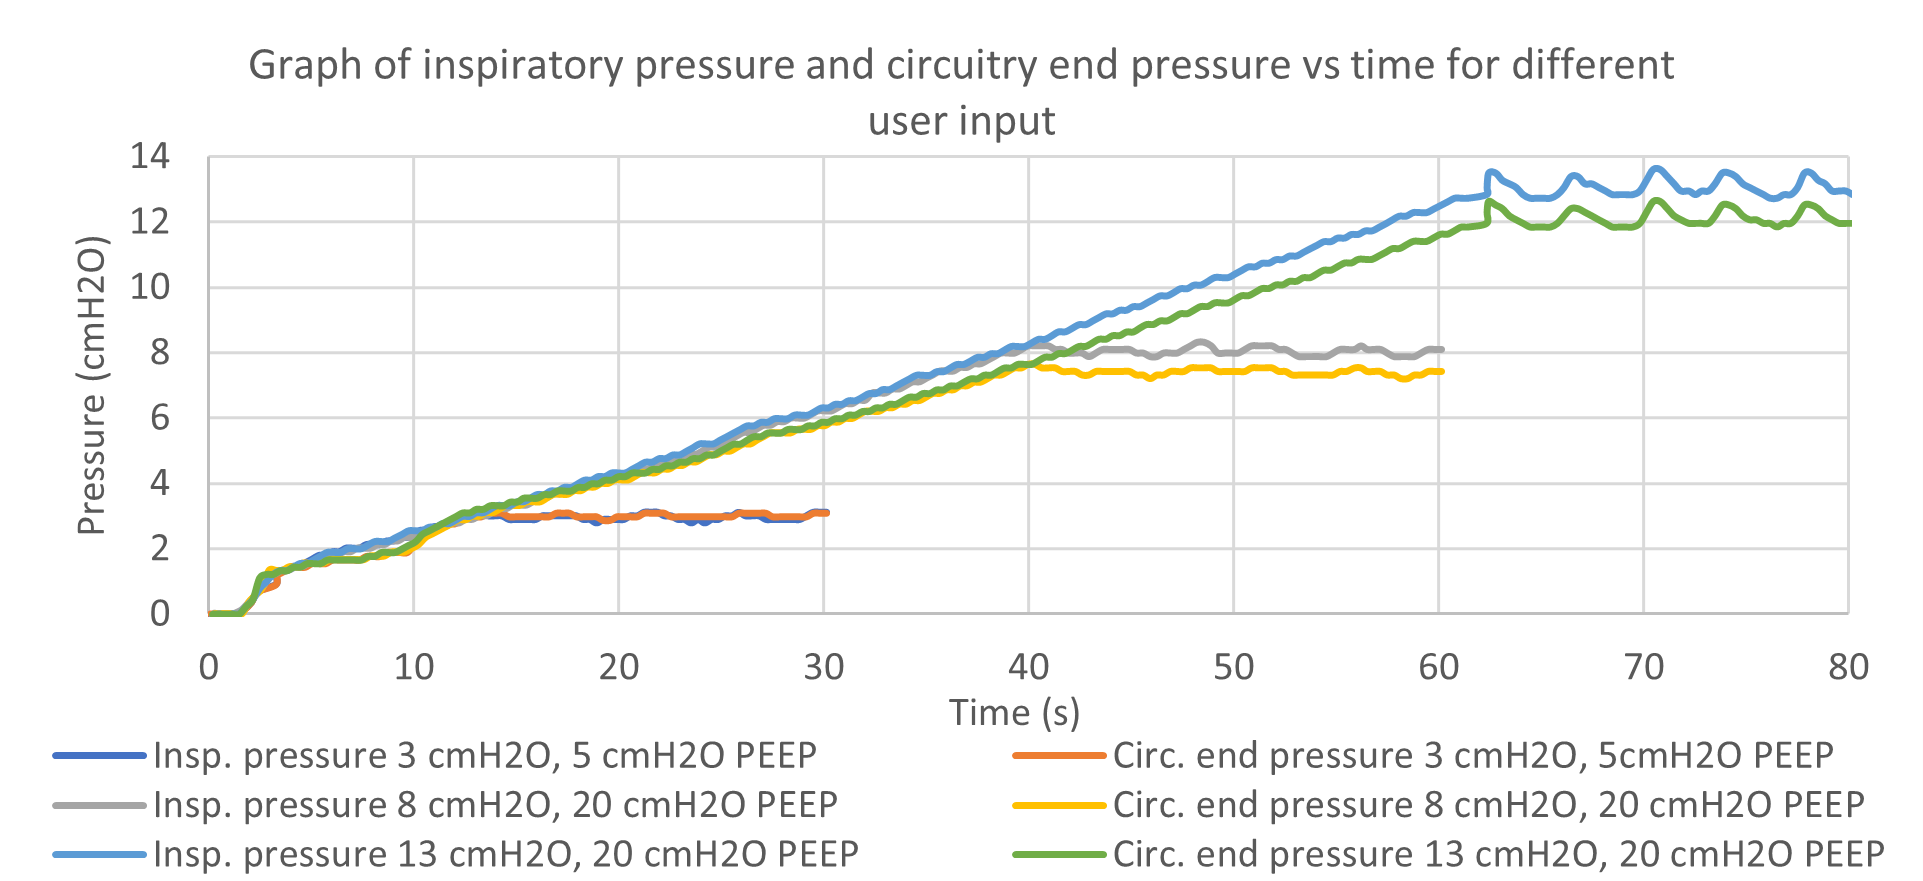 Figure 11: Inspiratory and circuit end pressure vs time for different user input